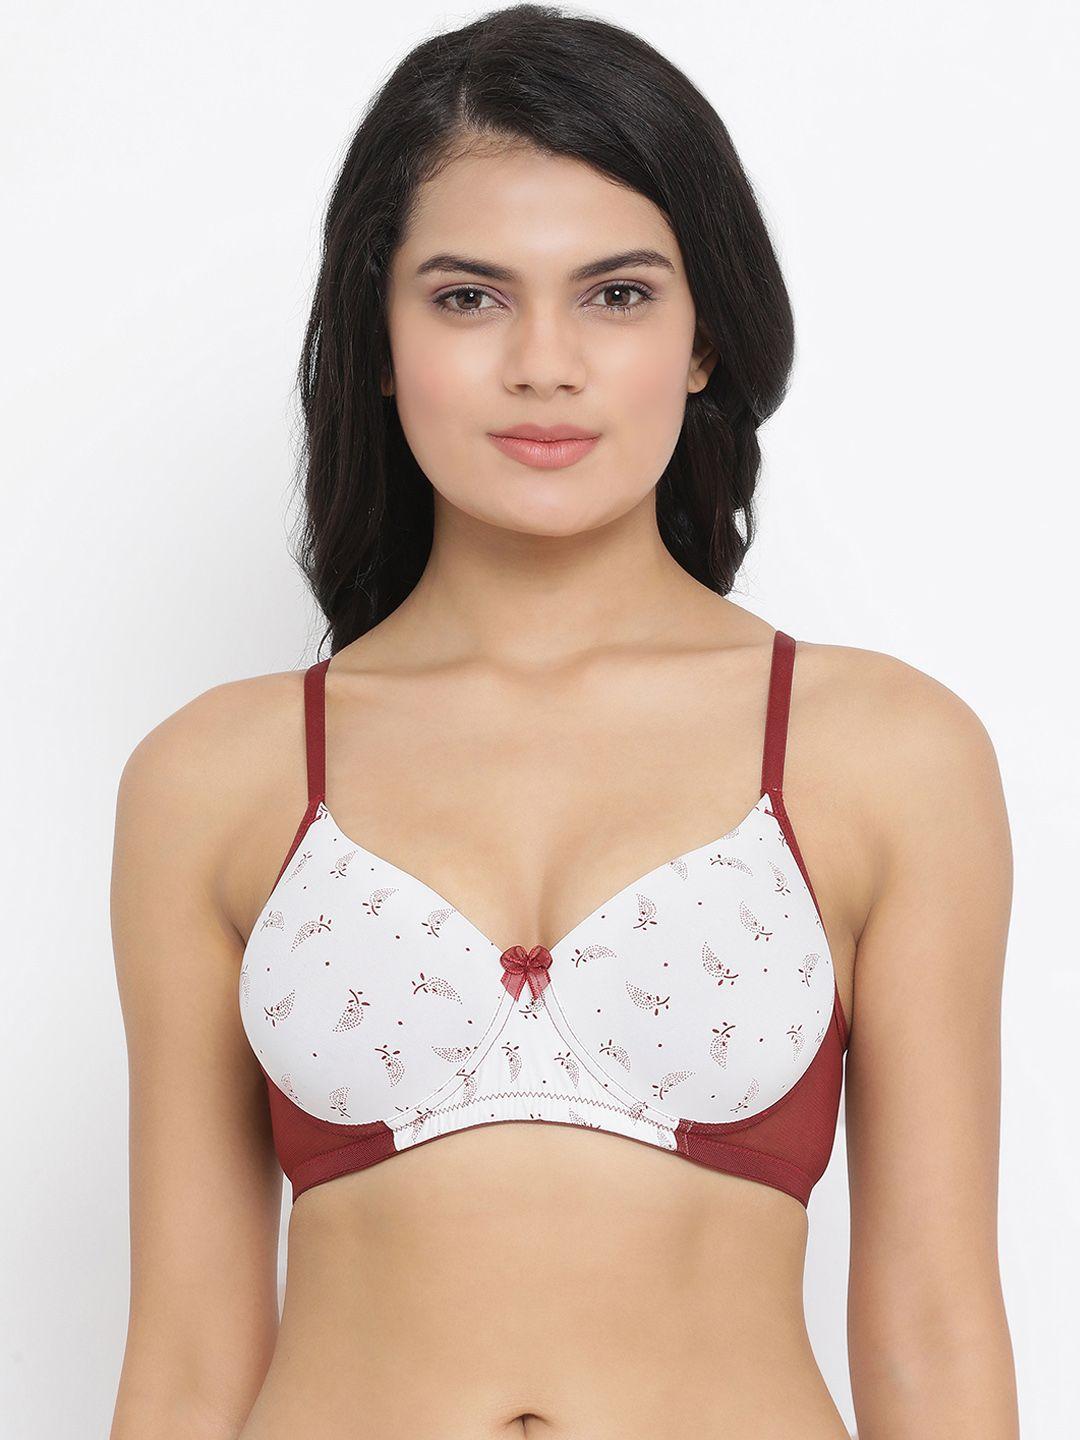 clovia white & brown printed non-wired lightly padded t-shirt bra br1737t1832b